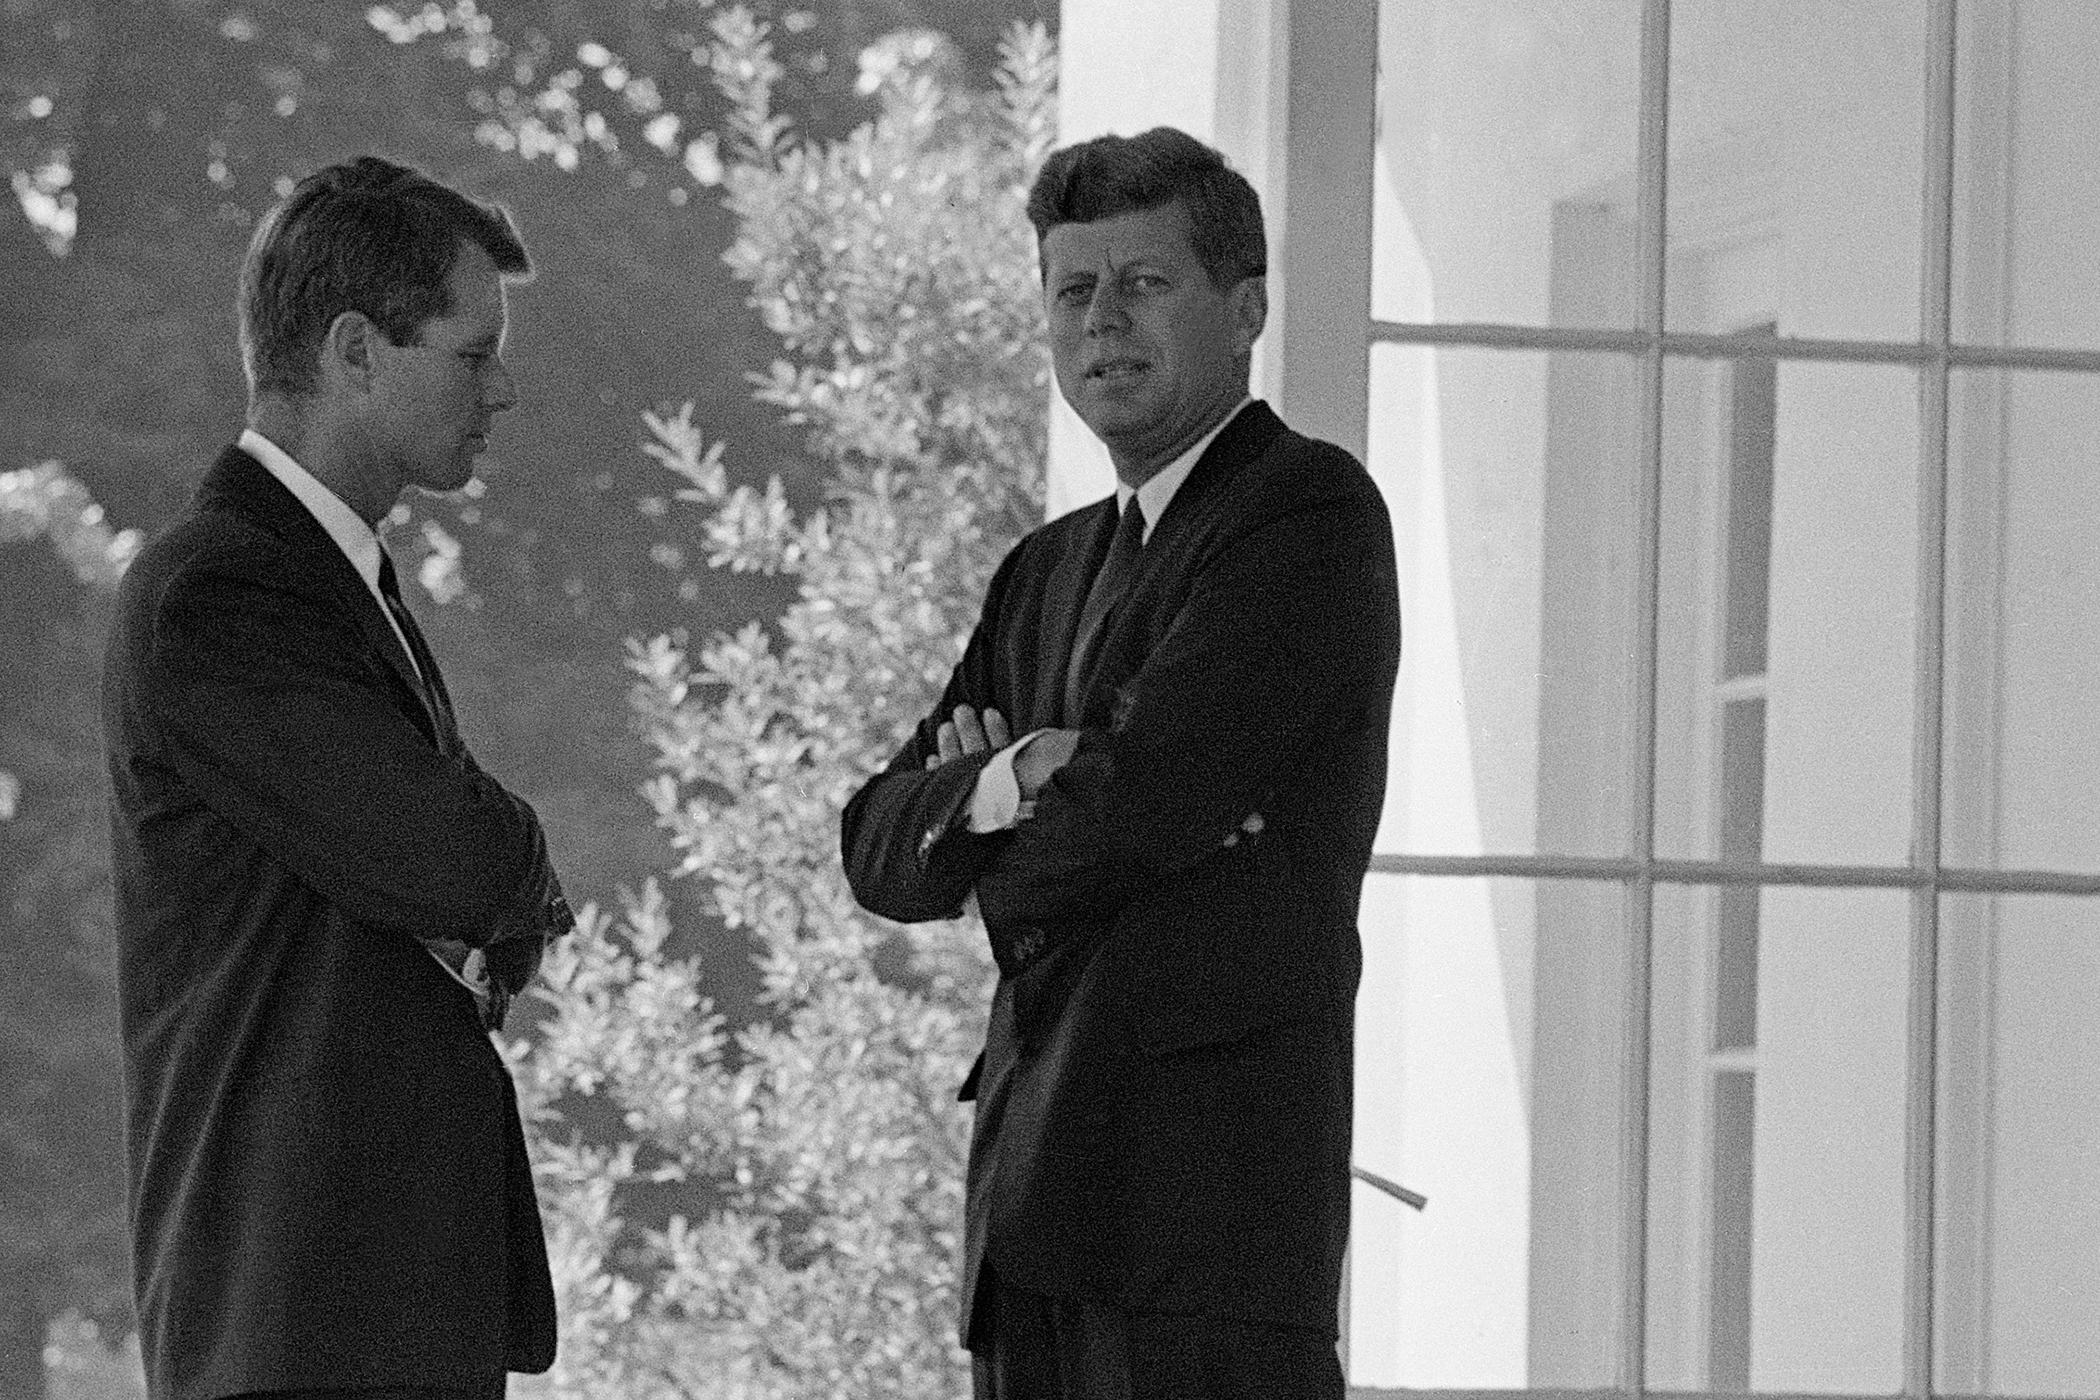 U.S. President John F. Kennedy, right, confers with his brother Attorney General Robert F. Kennedy at the White House in Washington, D.C., on Oct. 1, 1962 during the buildup of military tensions between the U.S. and the Soviet Union that became Cuban missile crisis later that month.